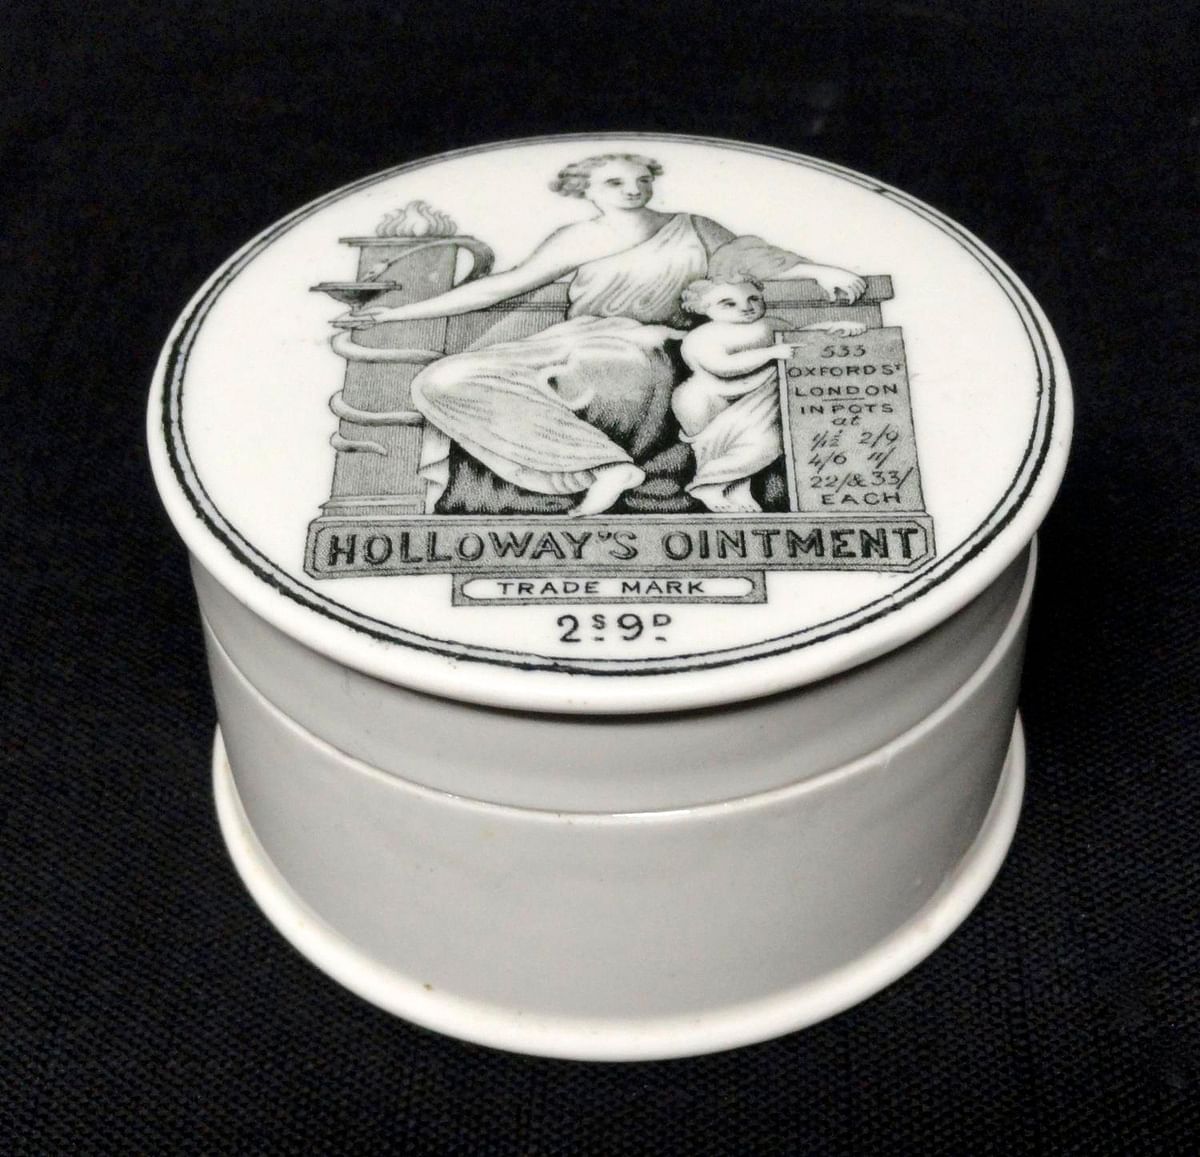 Pack shot of Holloway's Ointment